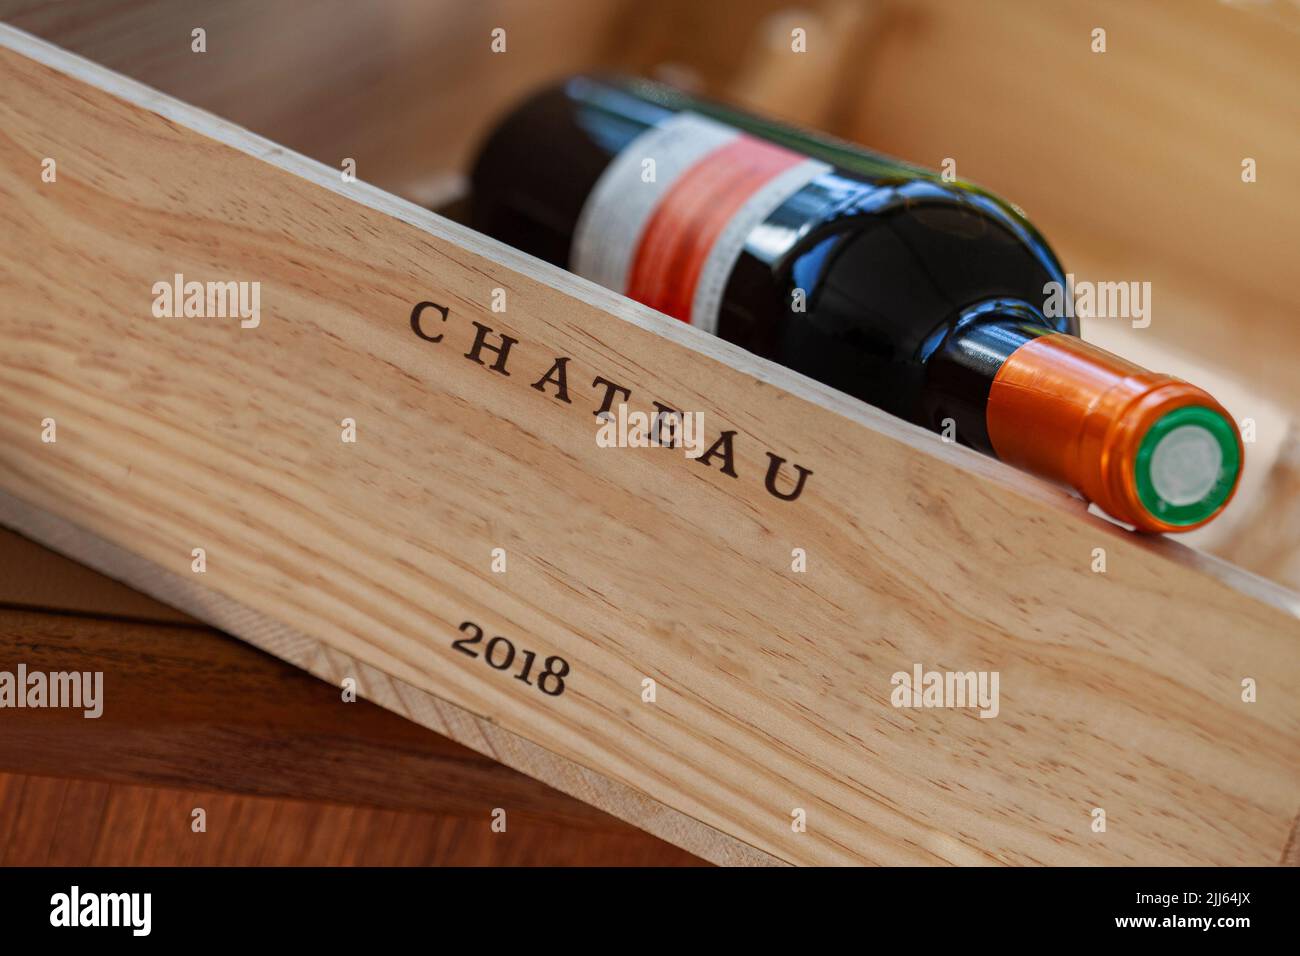 Wine bottle in a wooden box Stock Photo